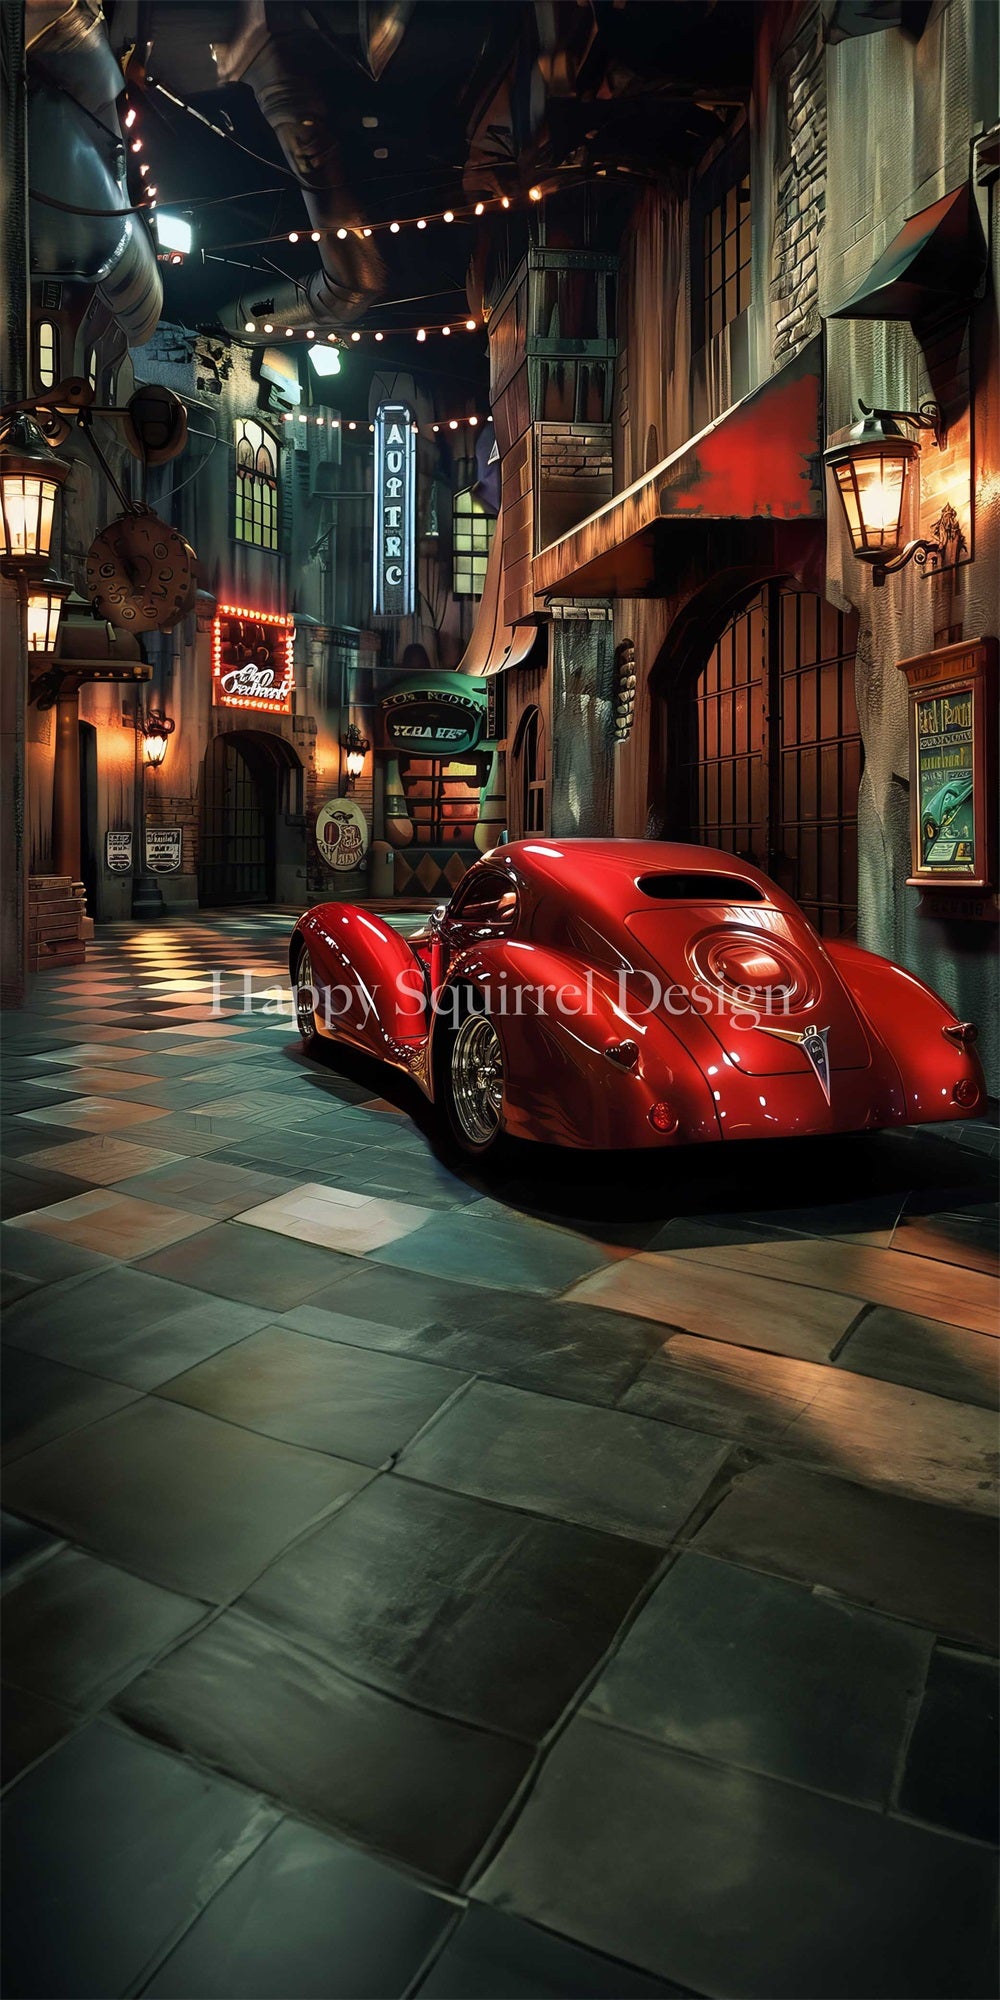 Kate Sweep Retro Night Automatic Street Shop Red Car Backdrop Designed by Happy Squirrel Design